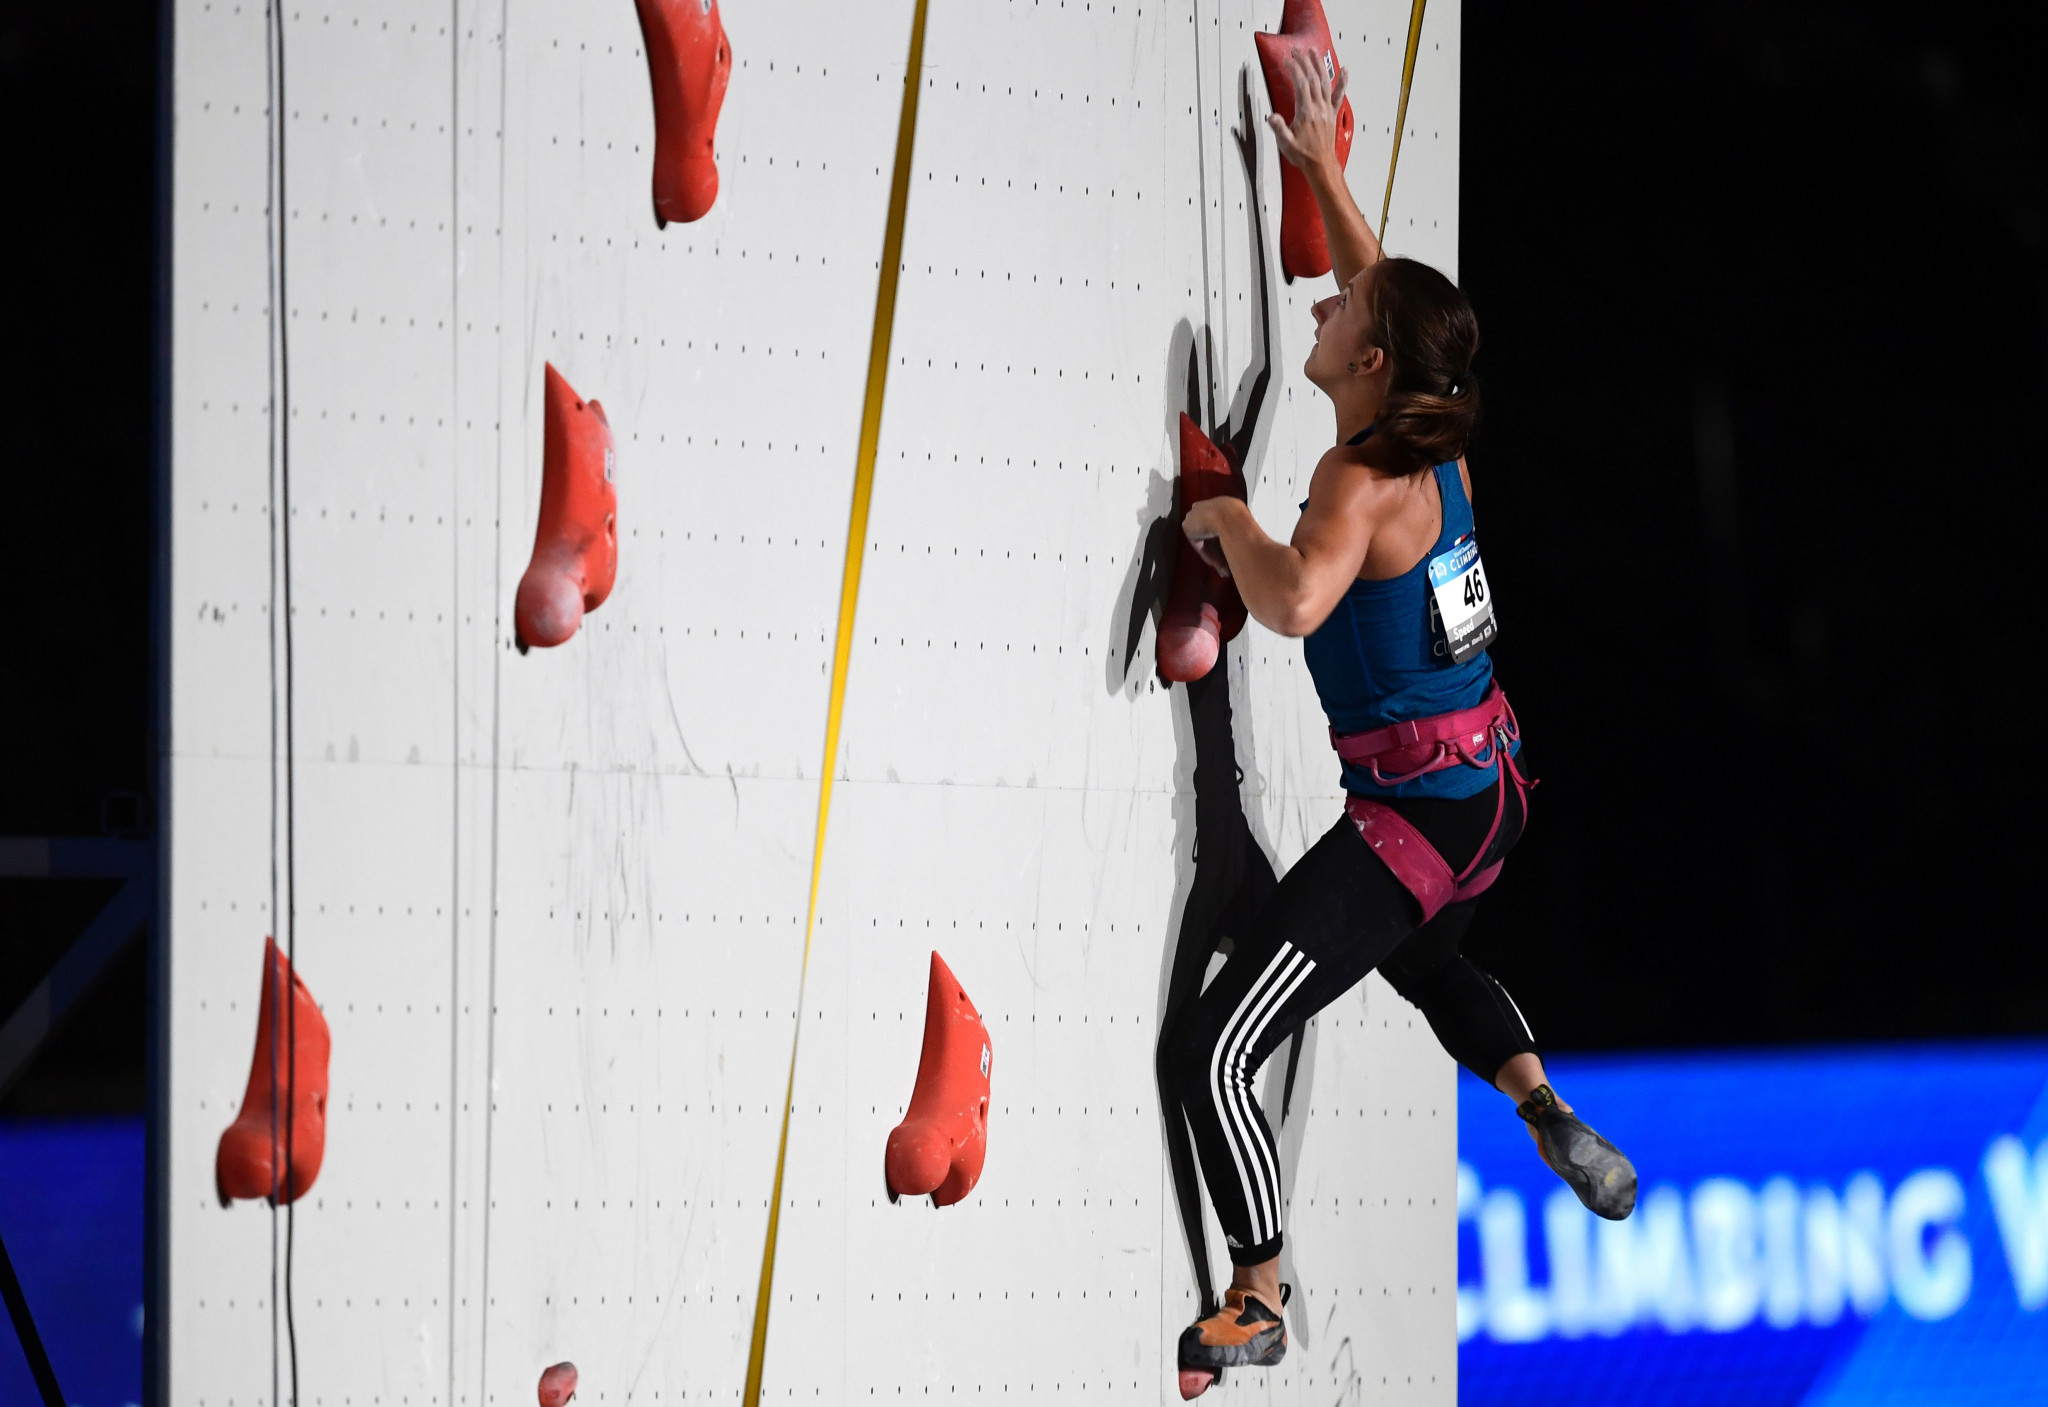 Sport Climbing World Cup action to resume in Chamonix